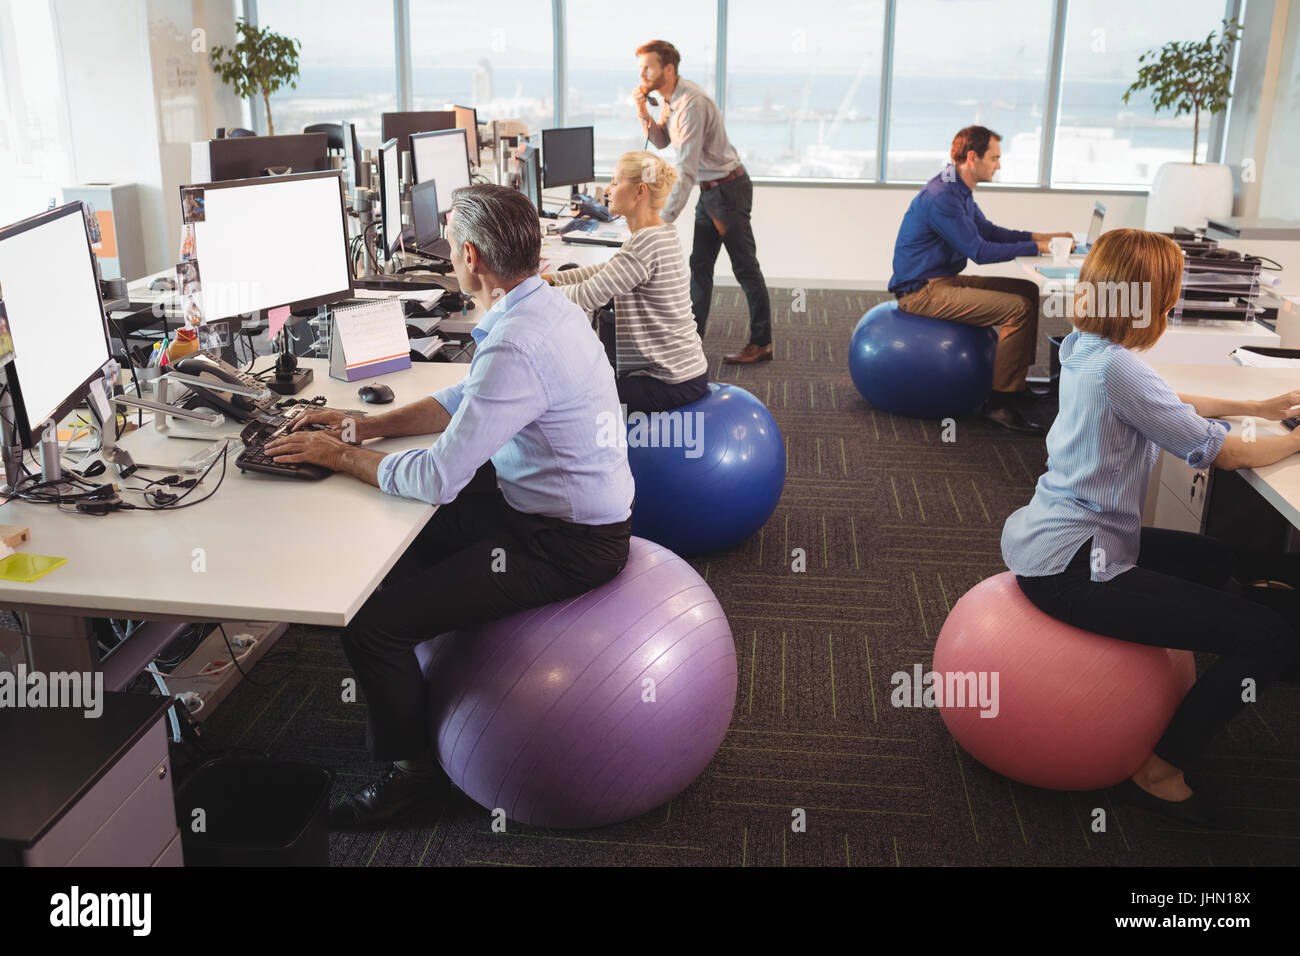 Business People Sitting On Exercise Balls While Working At Desk In